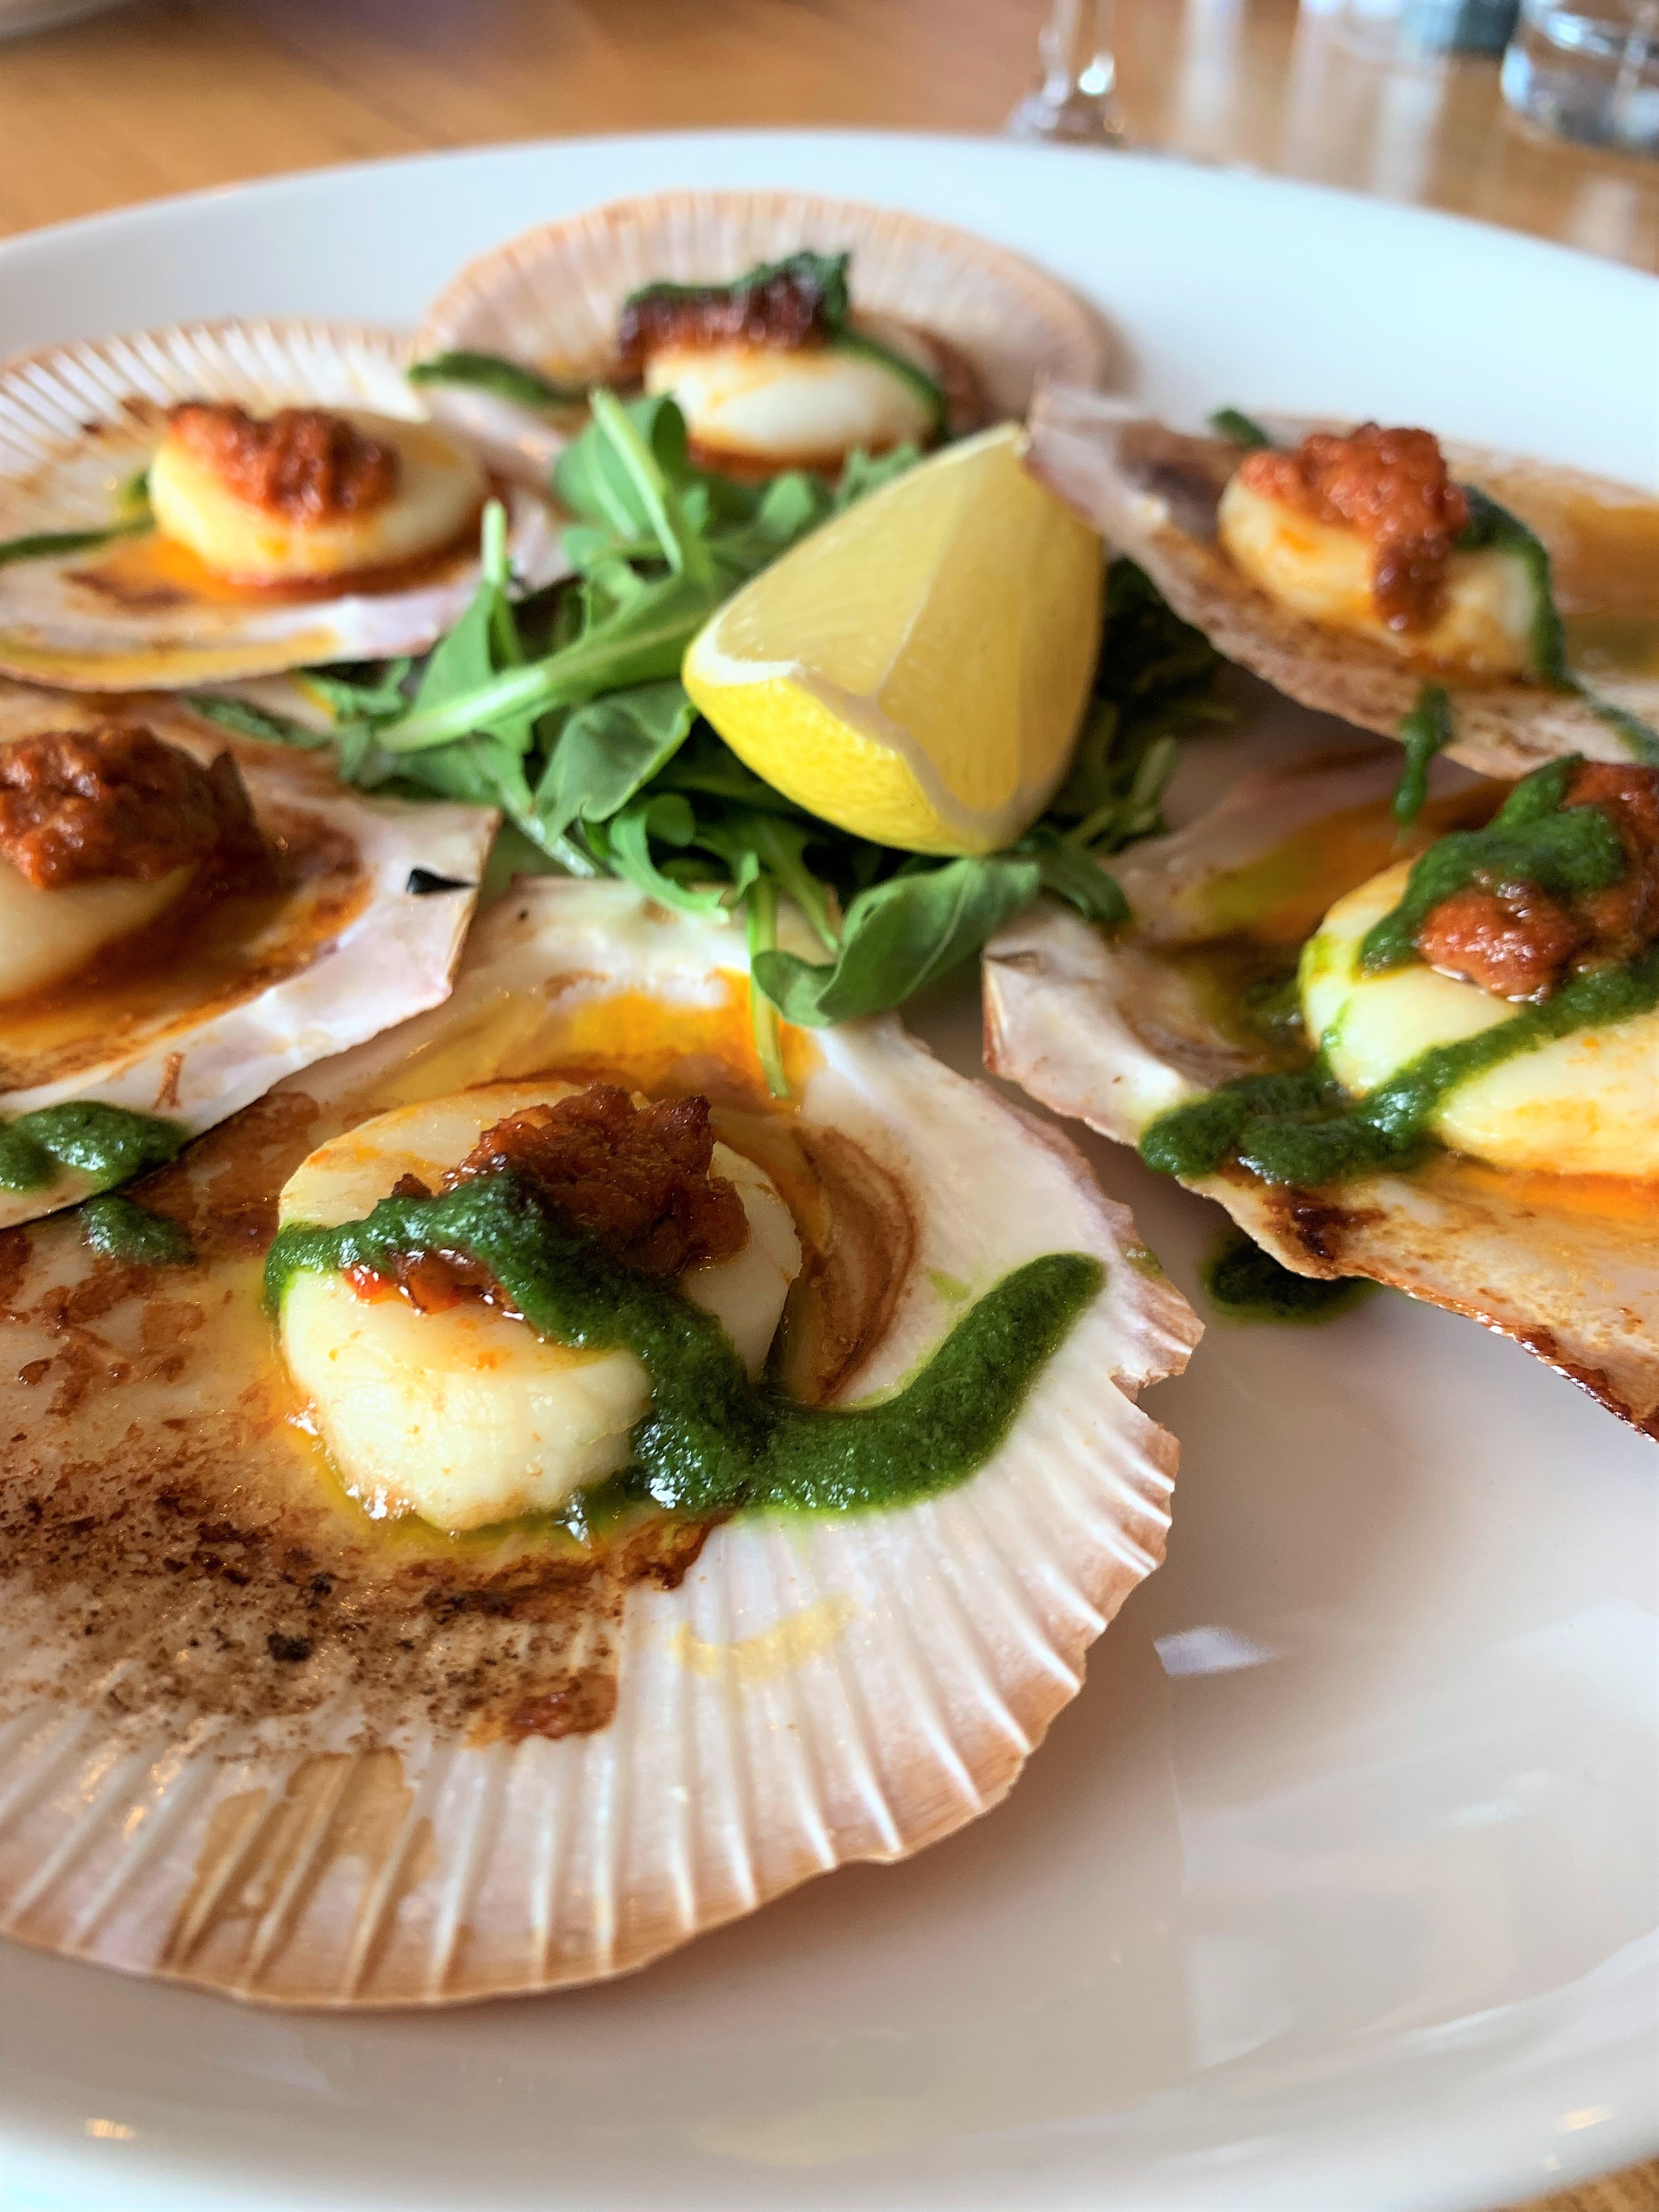 Scallops at Dovetails